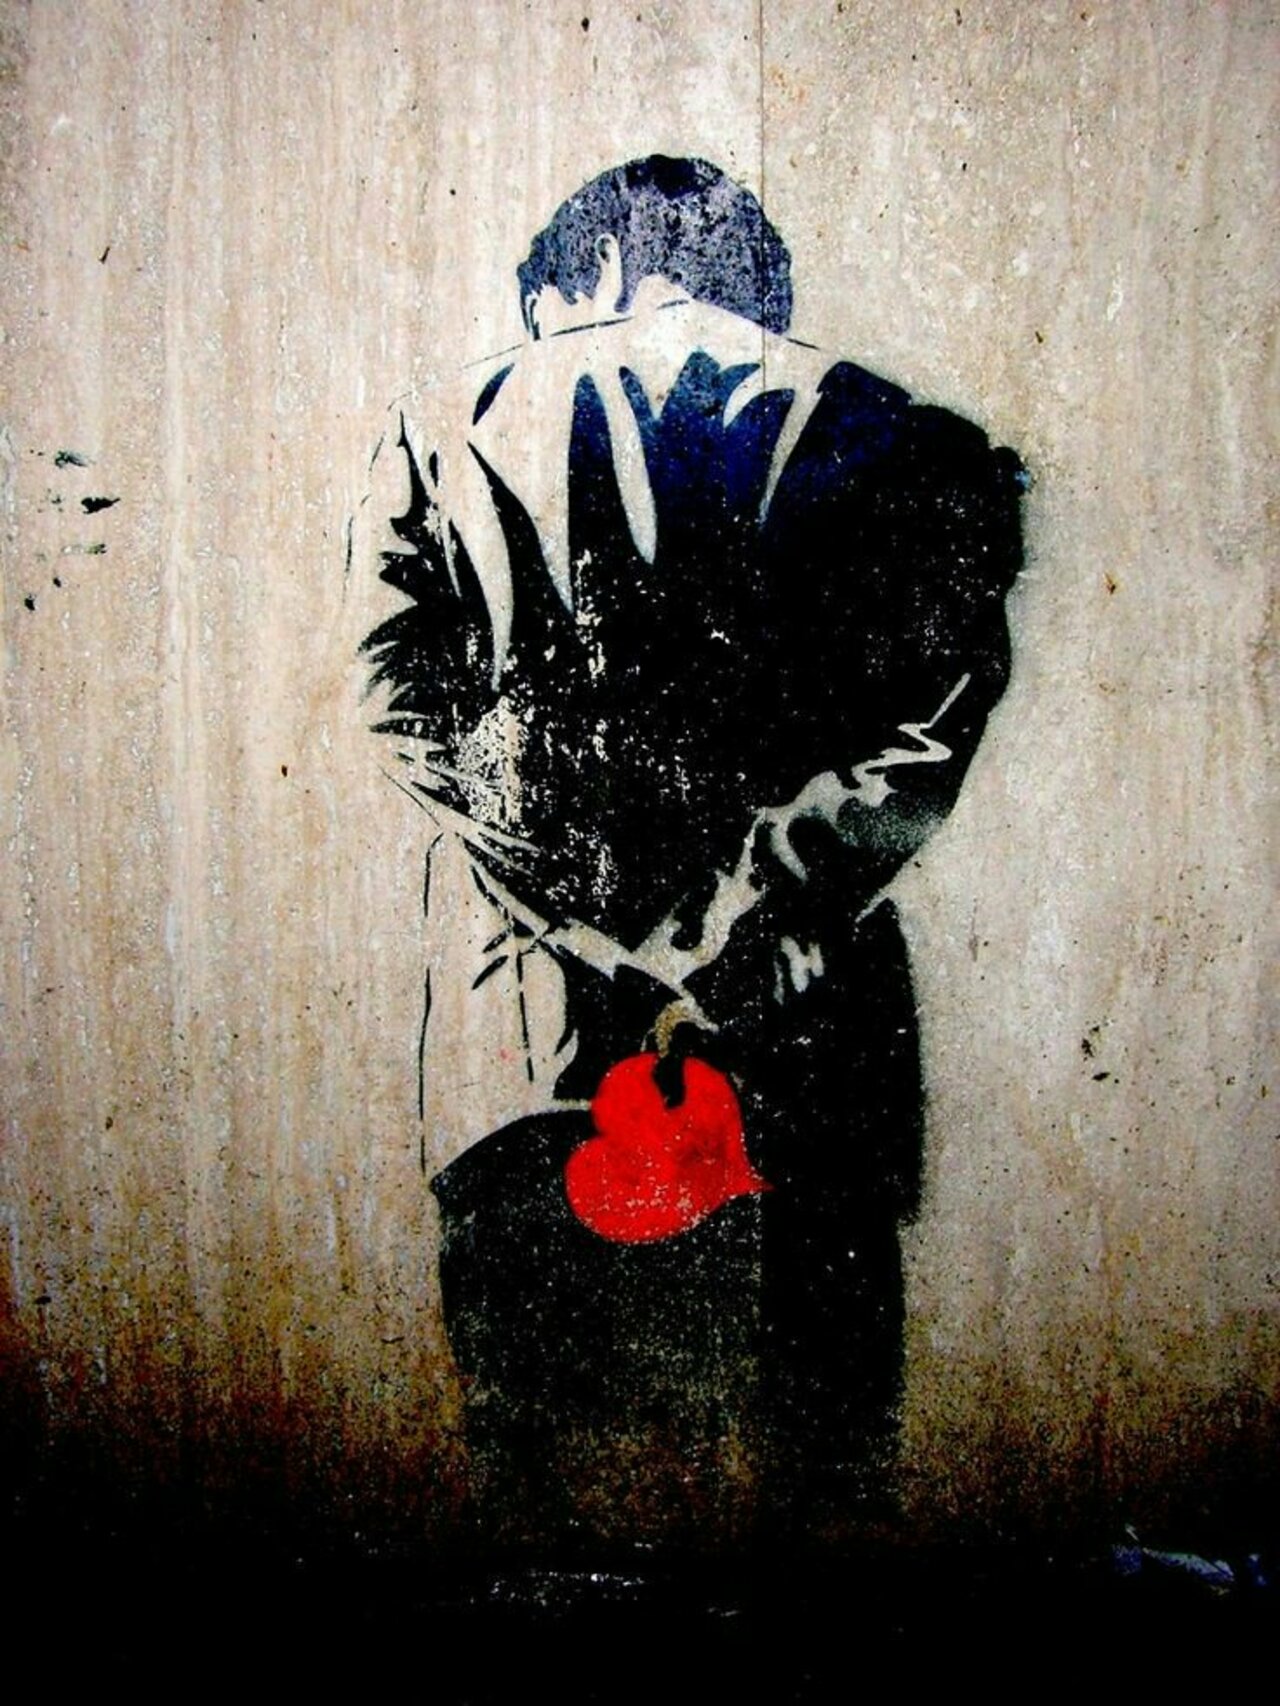 Where do we put the heart today?#streetart https://t.co/JhYWHn97hy